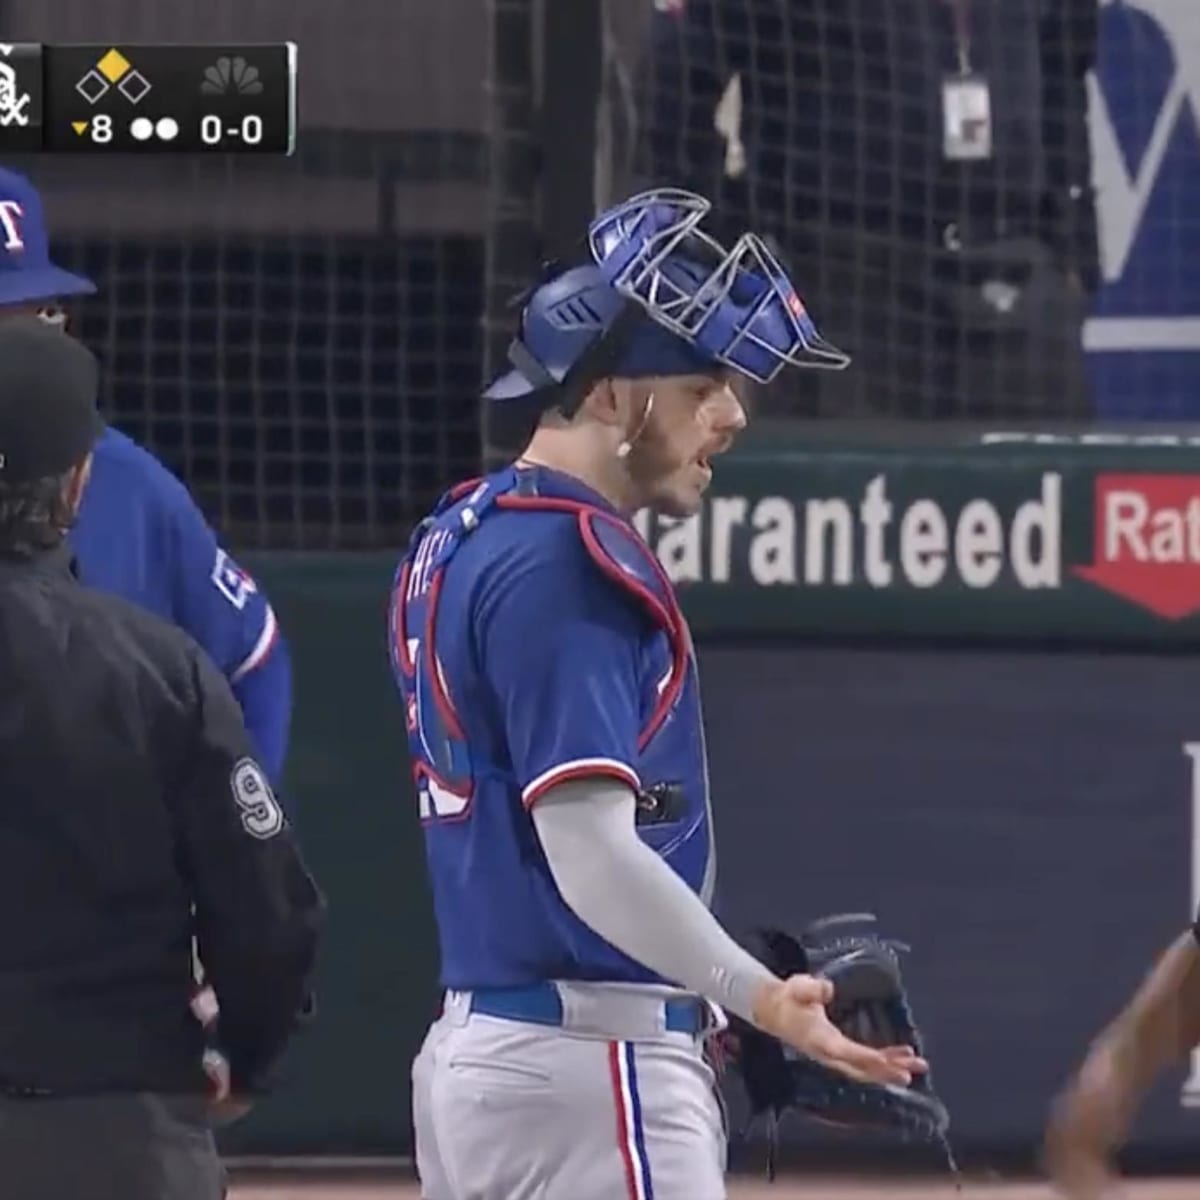 Texas Rangers: Lack of pitch control to blame during ugly loss to